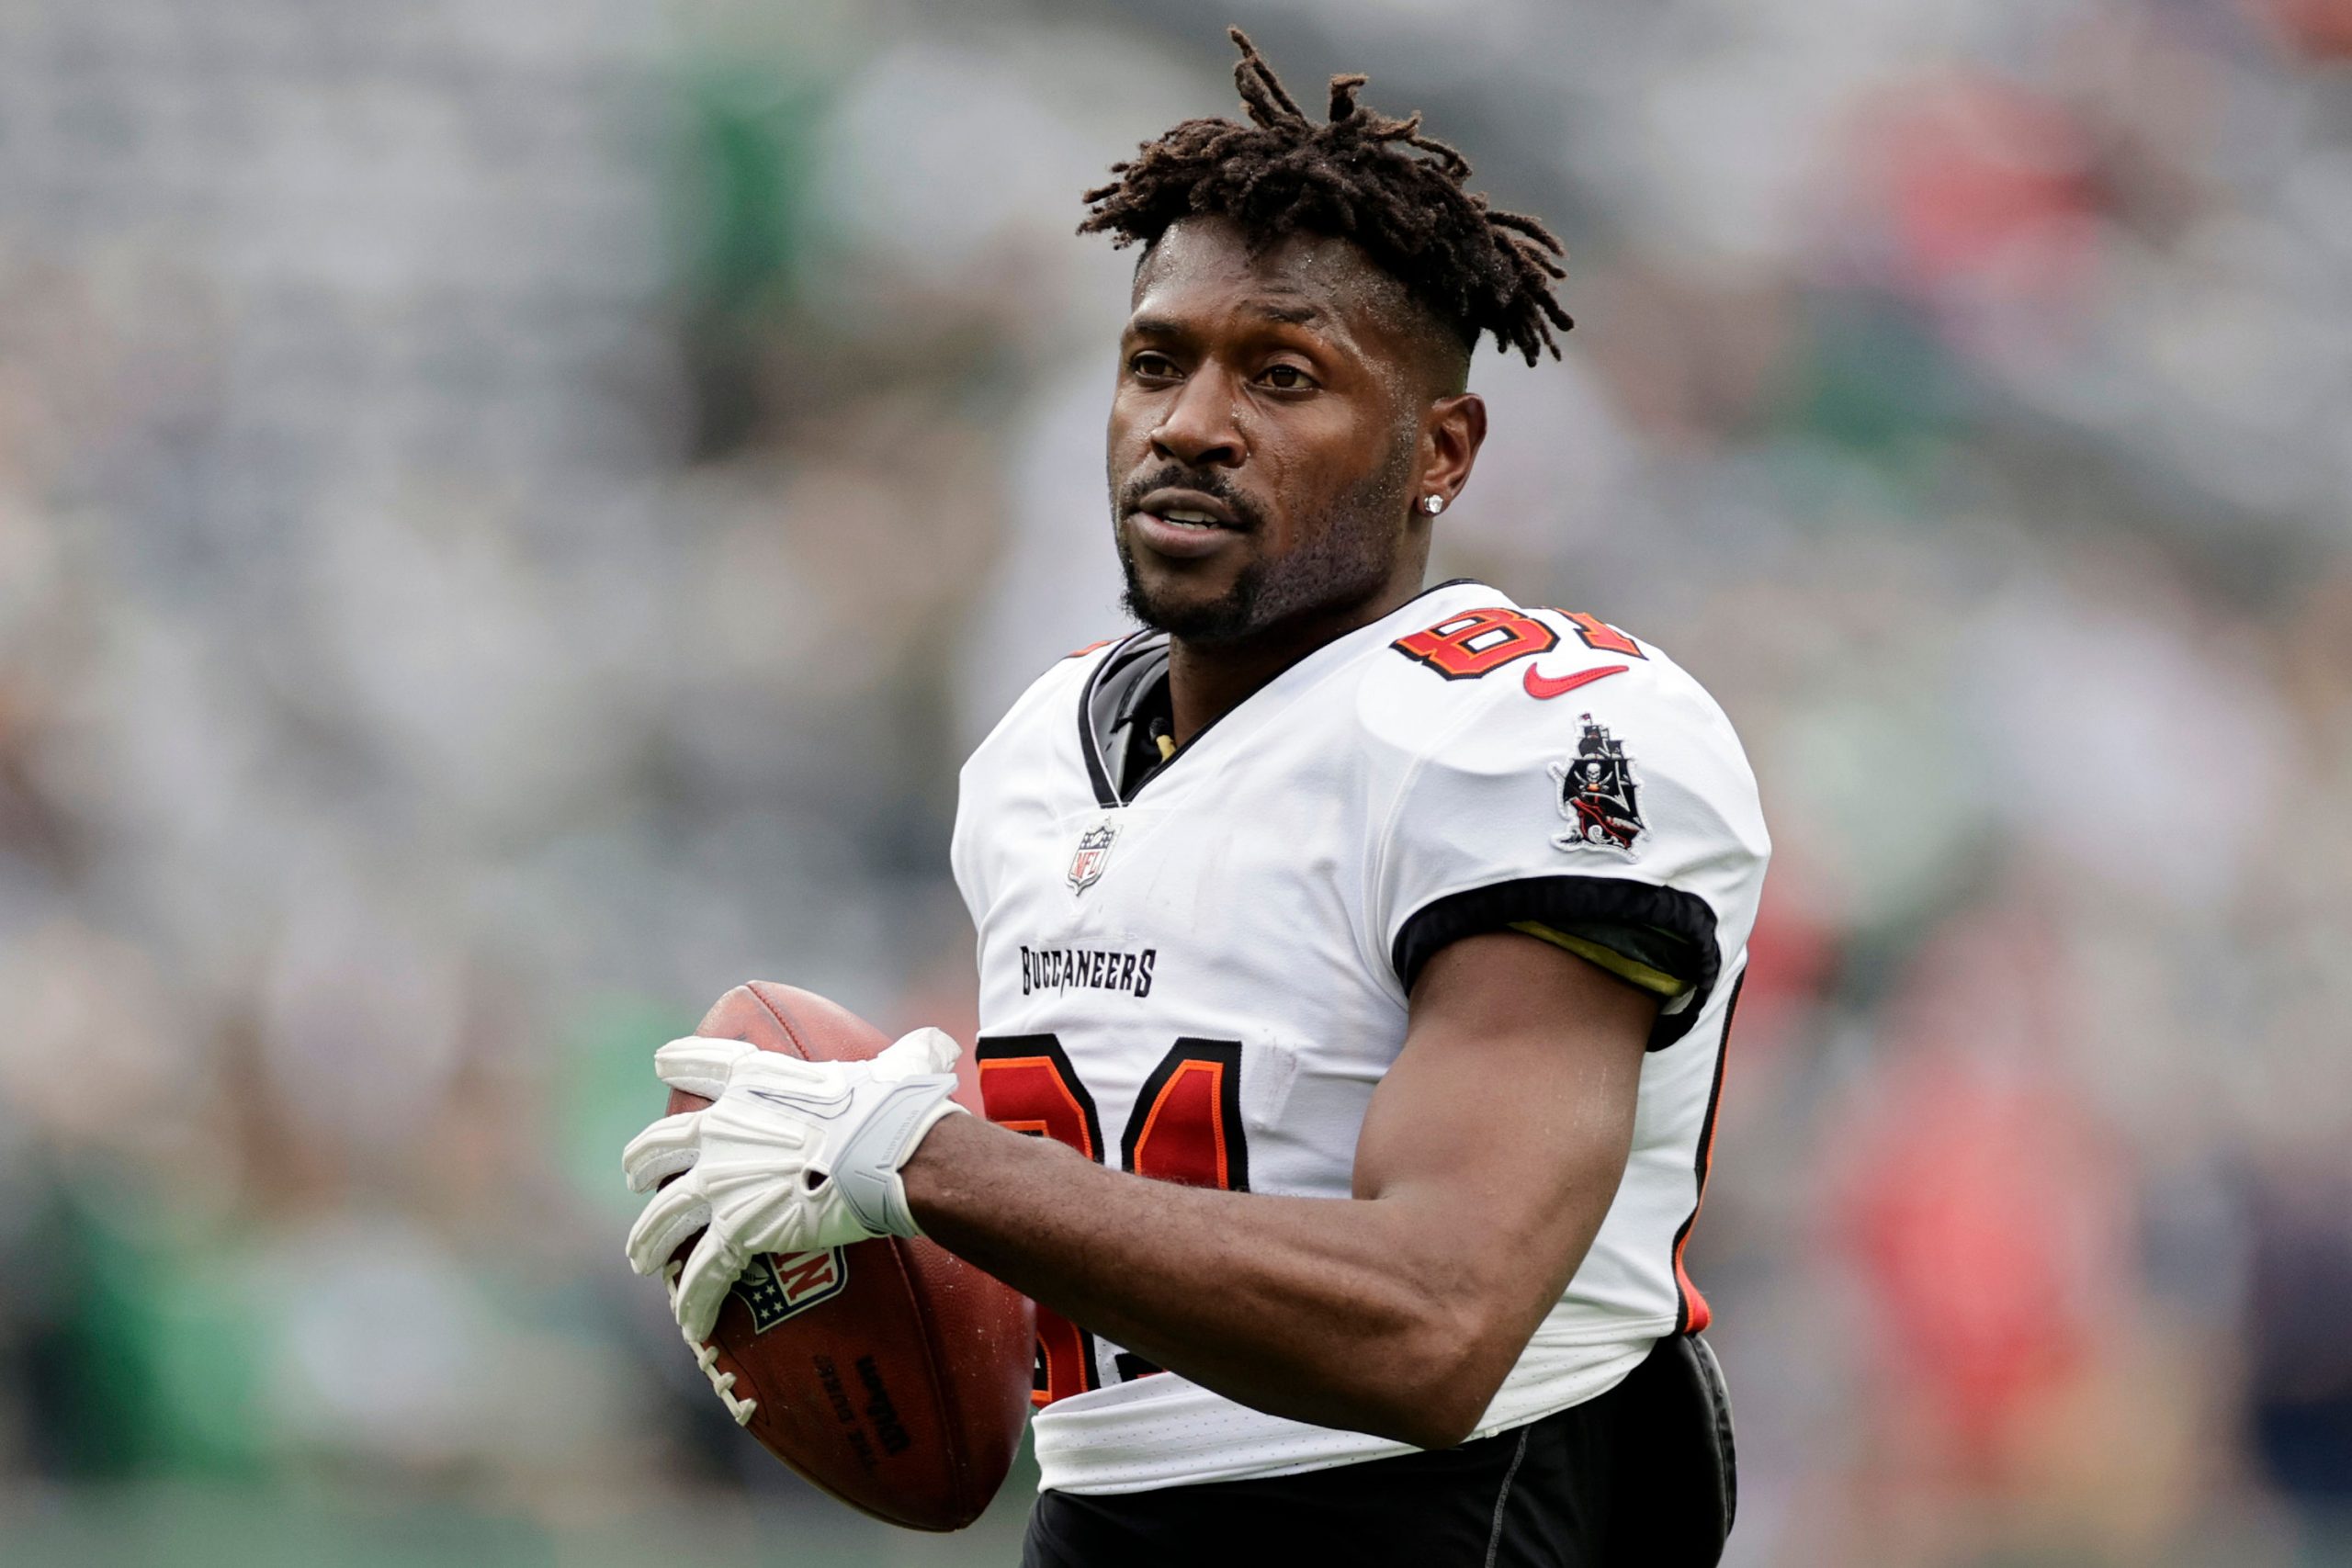 Former Tampa Bay Buccaneers star Antonio Brown’s charges and controversies